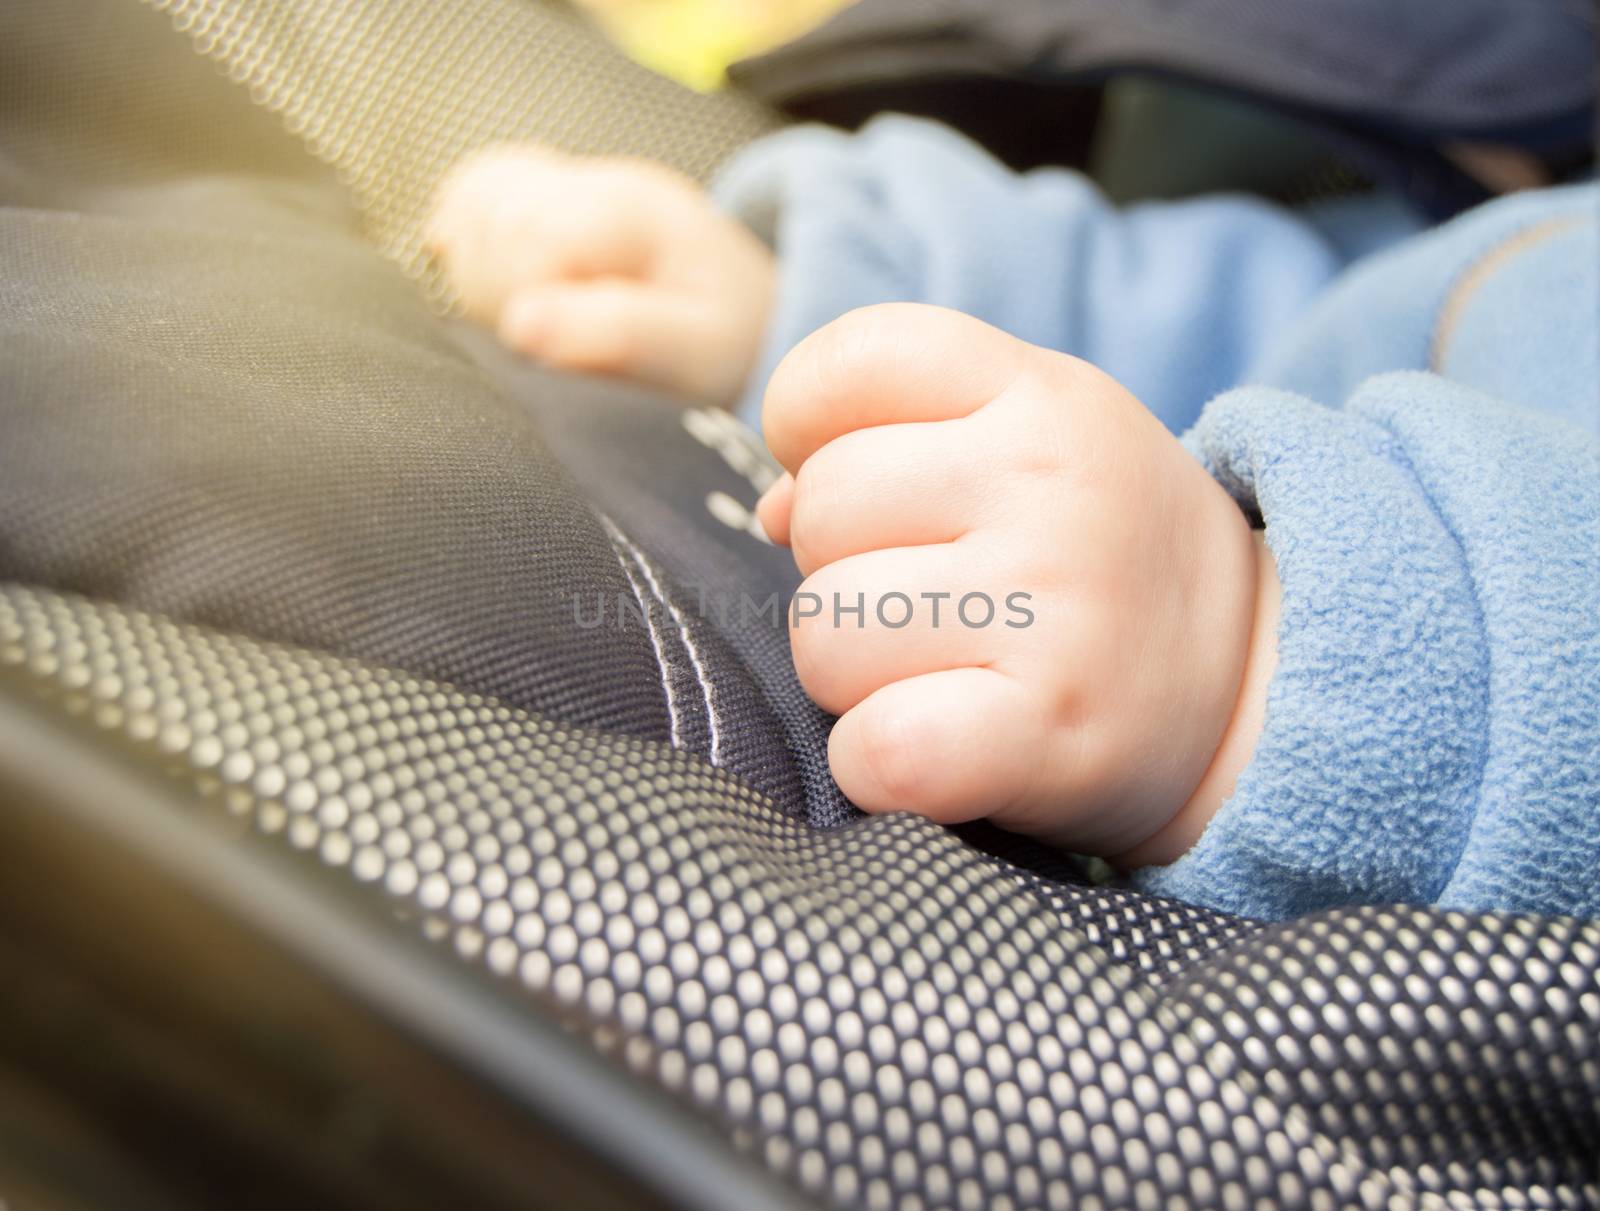 Child's hands fist, selective focus, the child is in the stroller while walking outdoors, close-up.